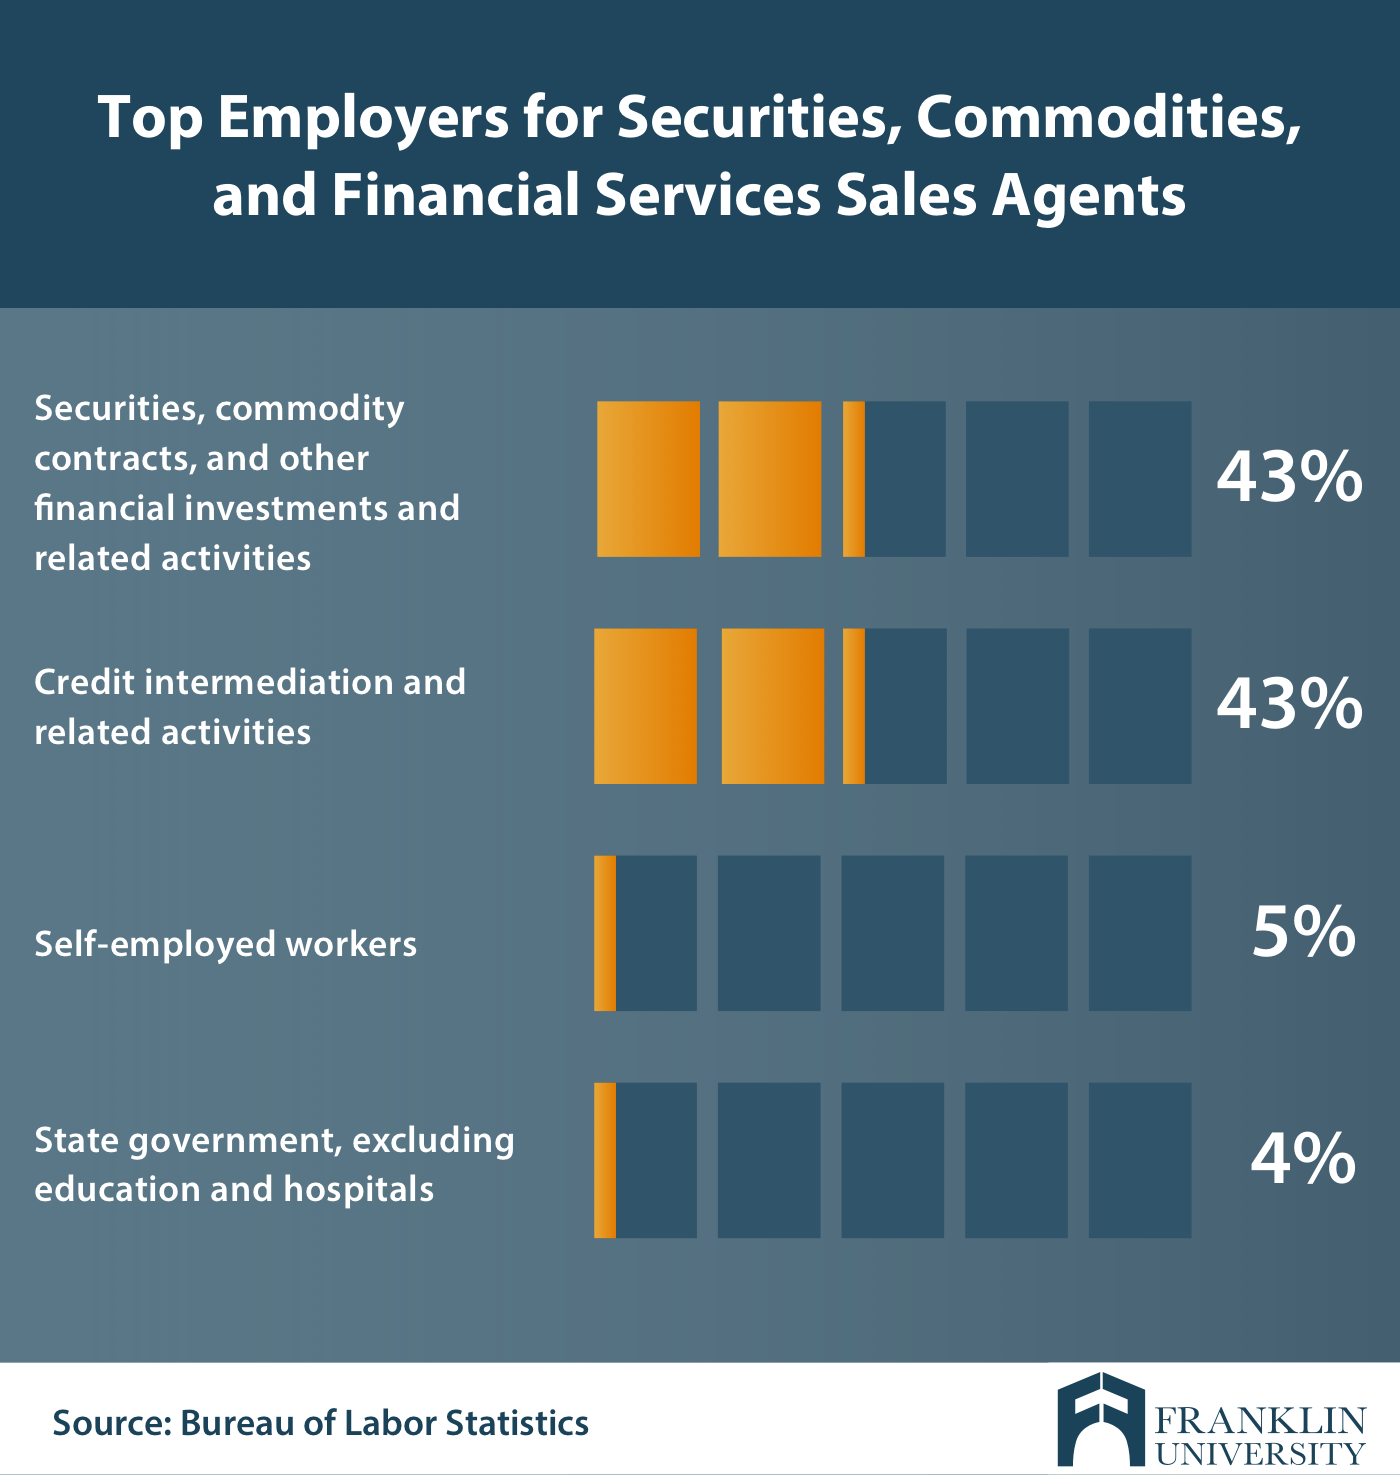 graphic describing the top employers for securities, commodities, and financial services sales agents